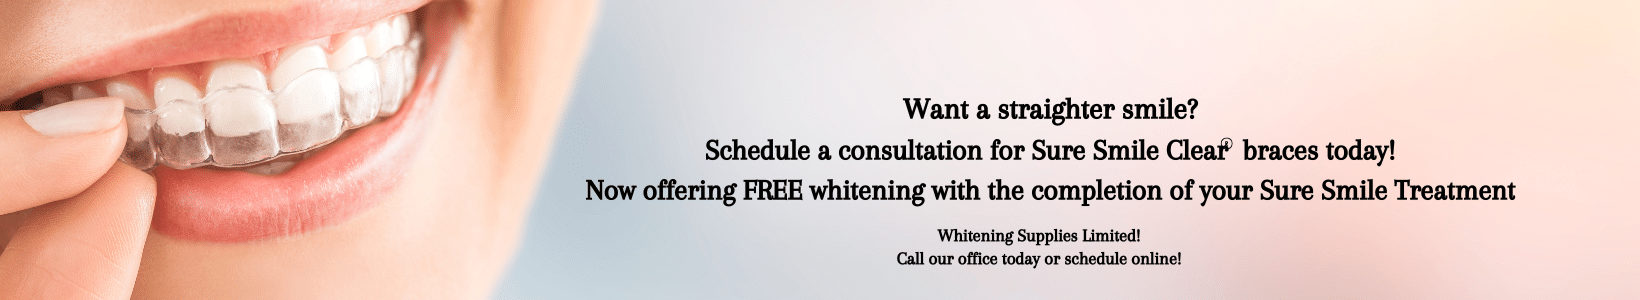 FREE Whitening with your treatment! (Facebook Cover) (1640 x 300 px)